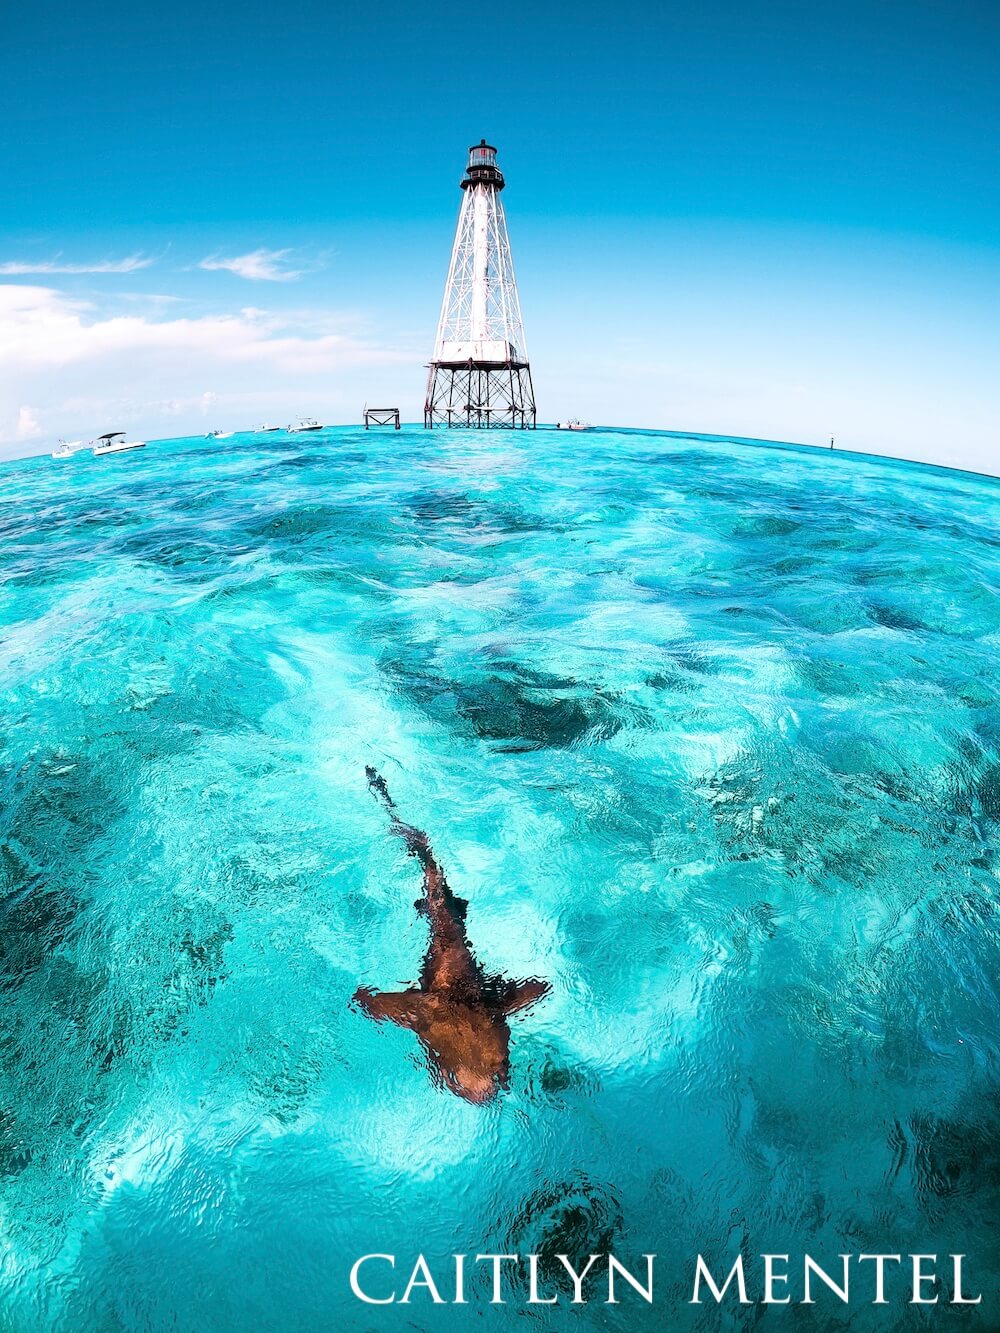 Nurse shark swimming under swirly cerulean waters with a white lighthouse in the distance.